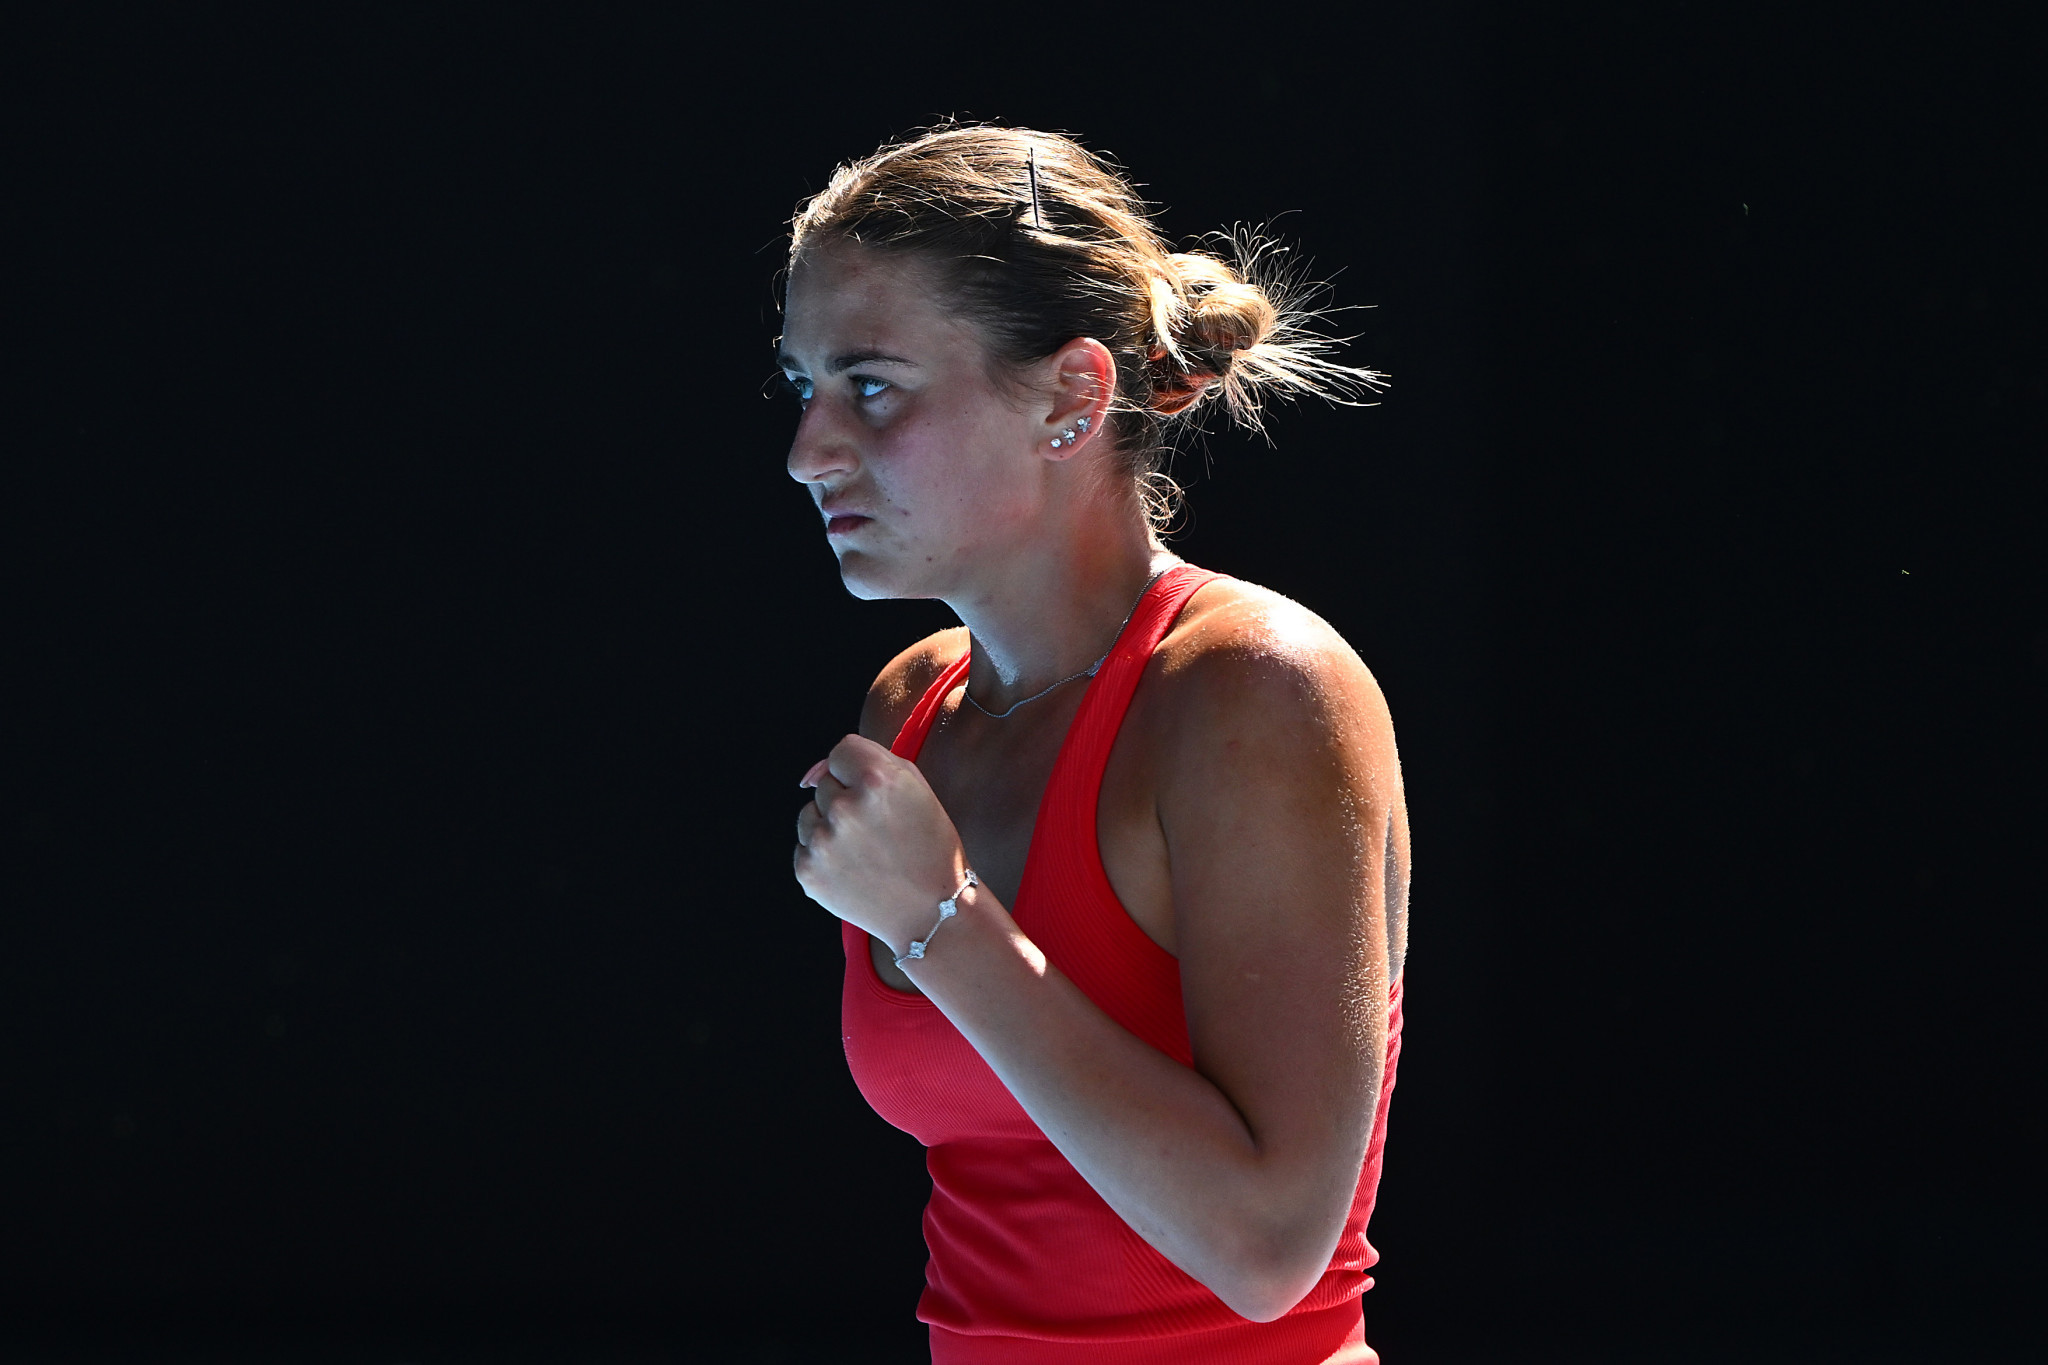 Ukraine's Marta Kostyuk claimed the WTA has ignored requests for a meeting with players from her country ©Getty Images